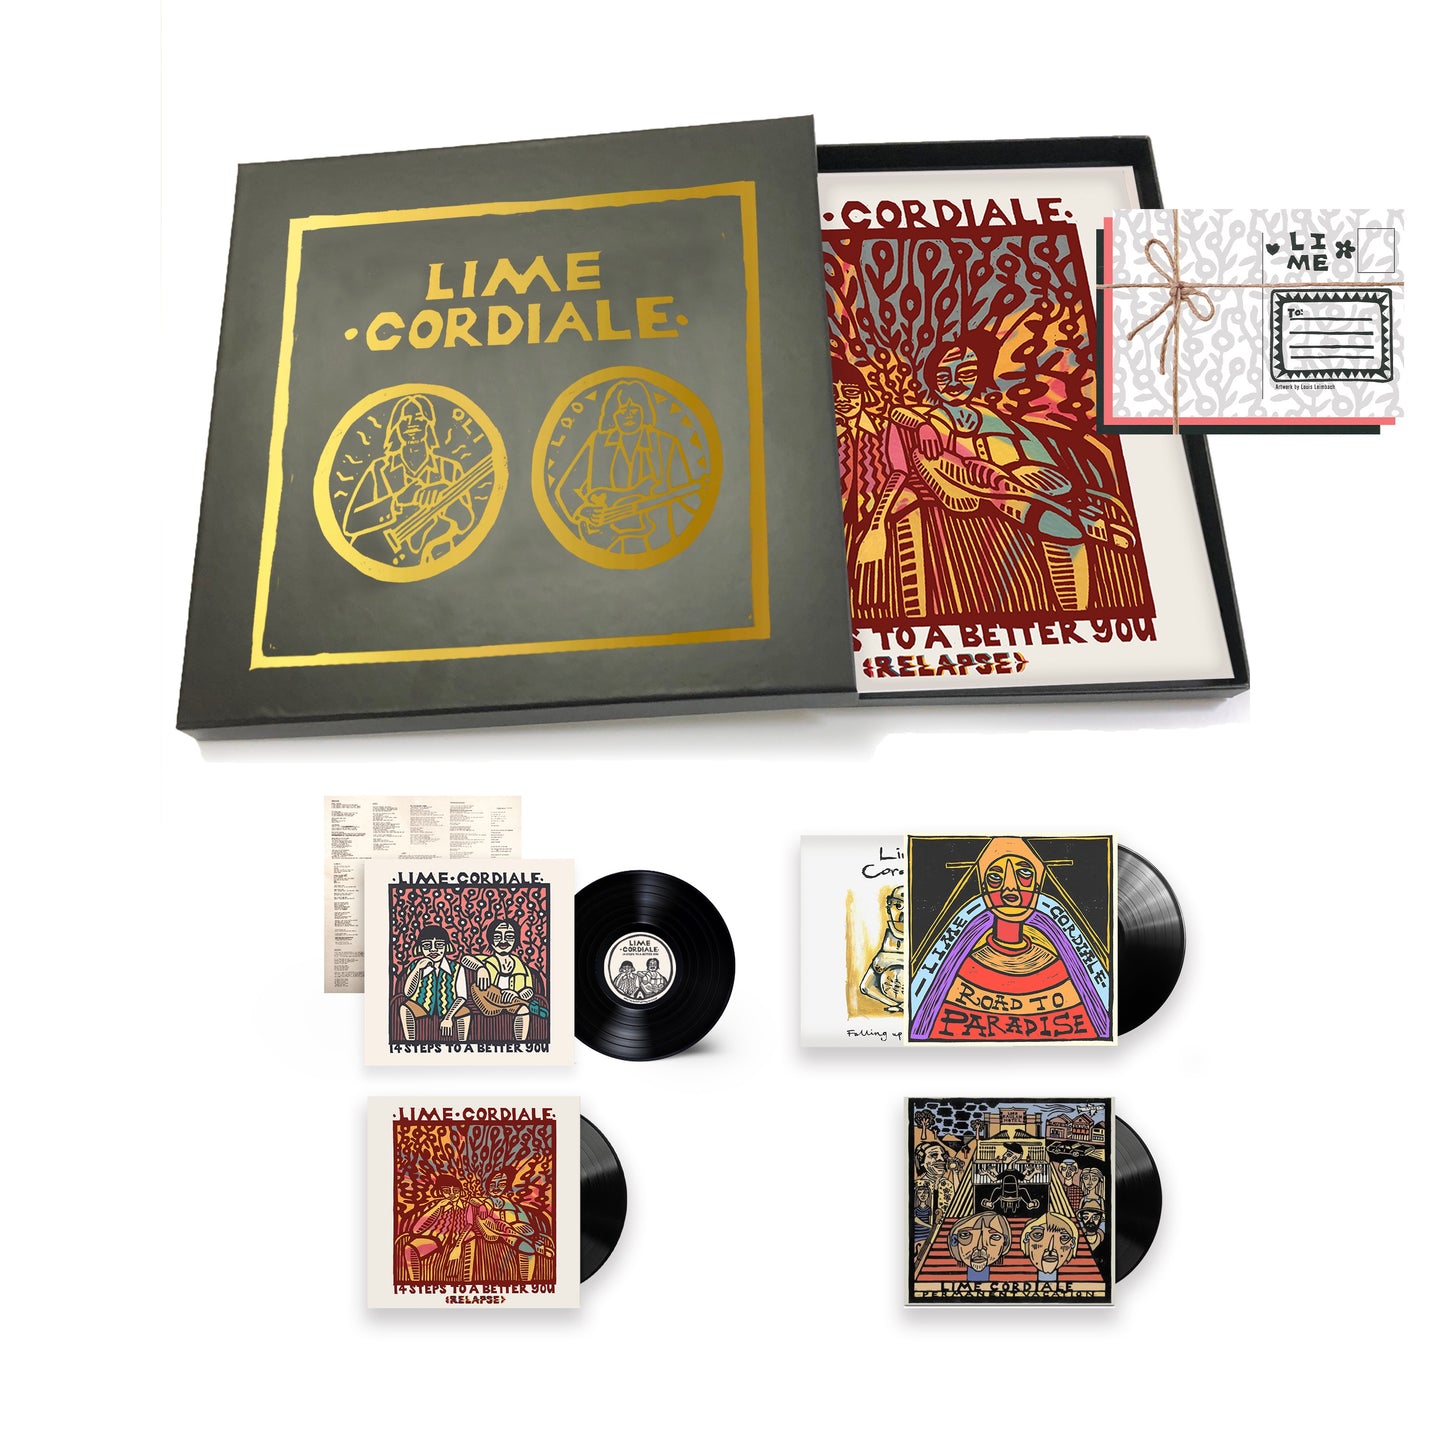 NEW - Lime Cordiale, The Collection Box Set 4LP